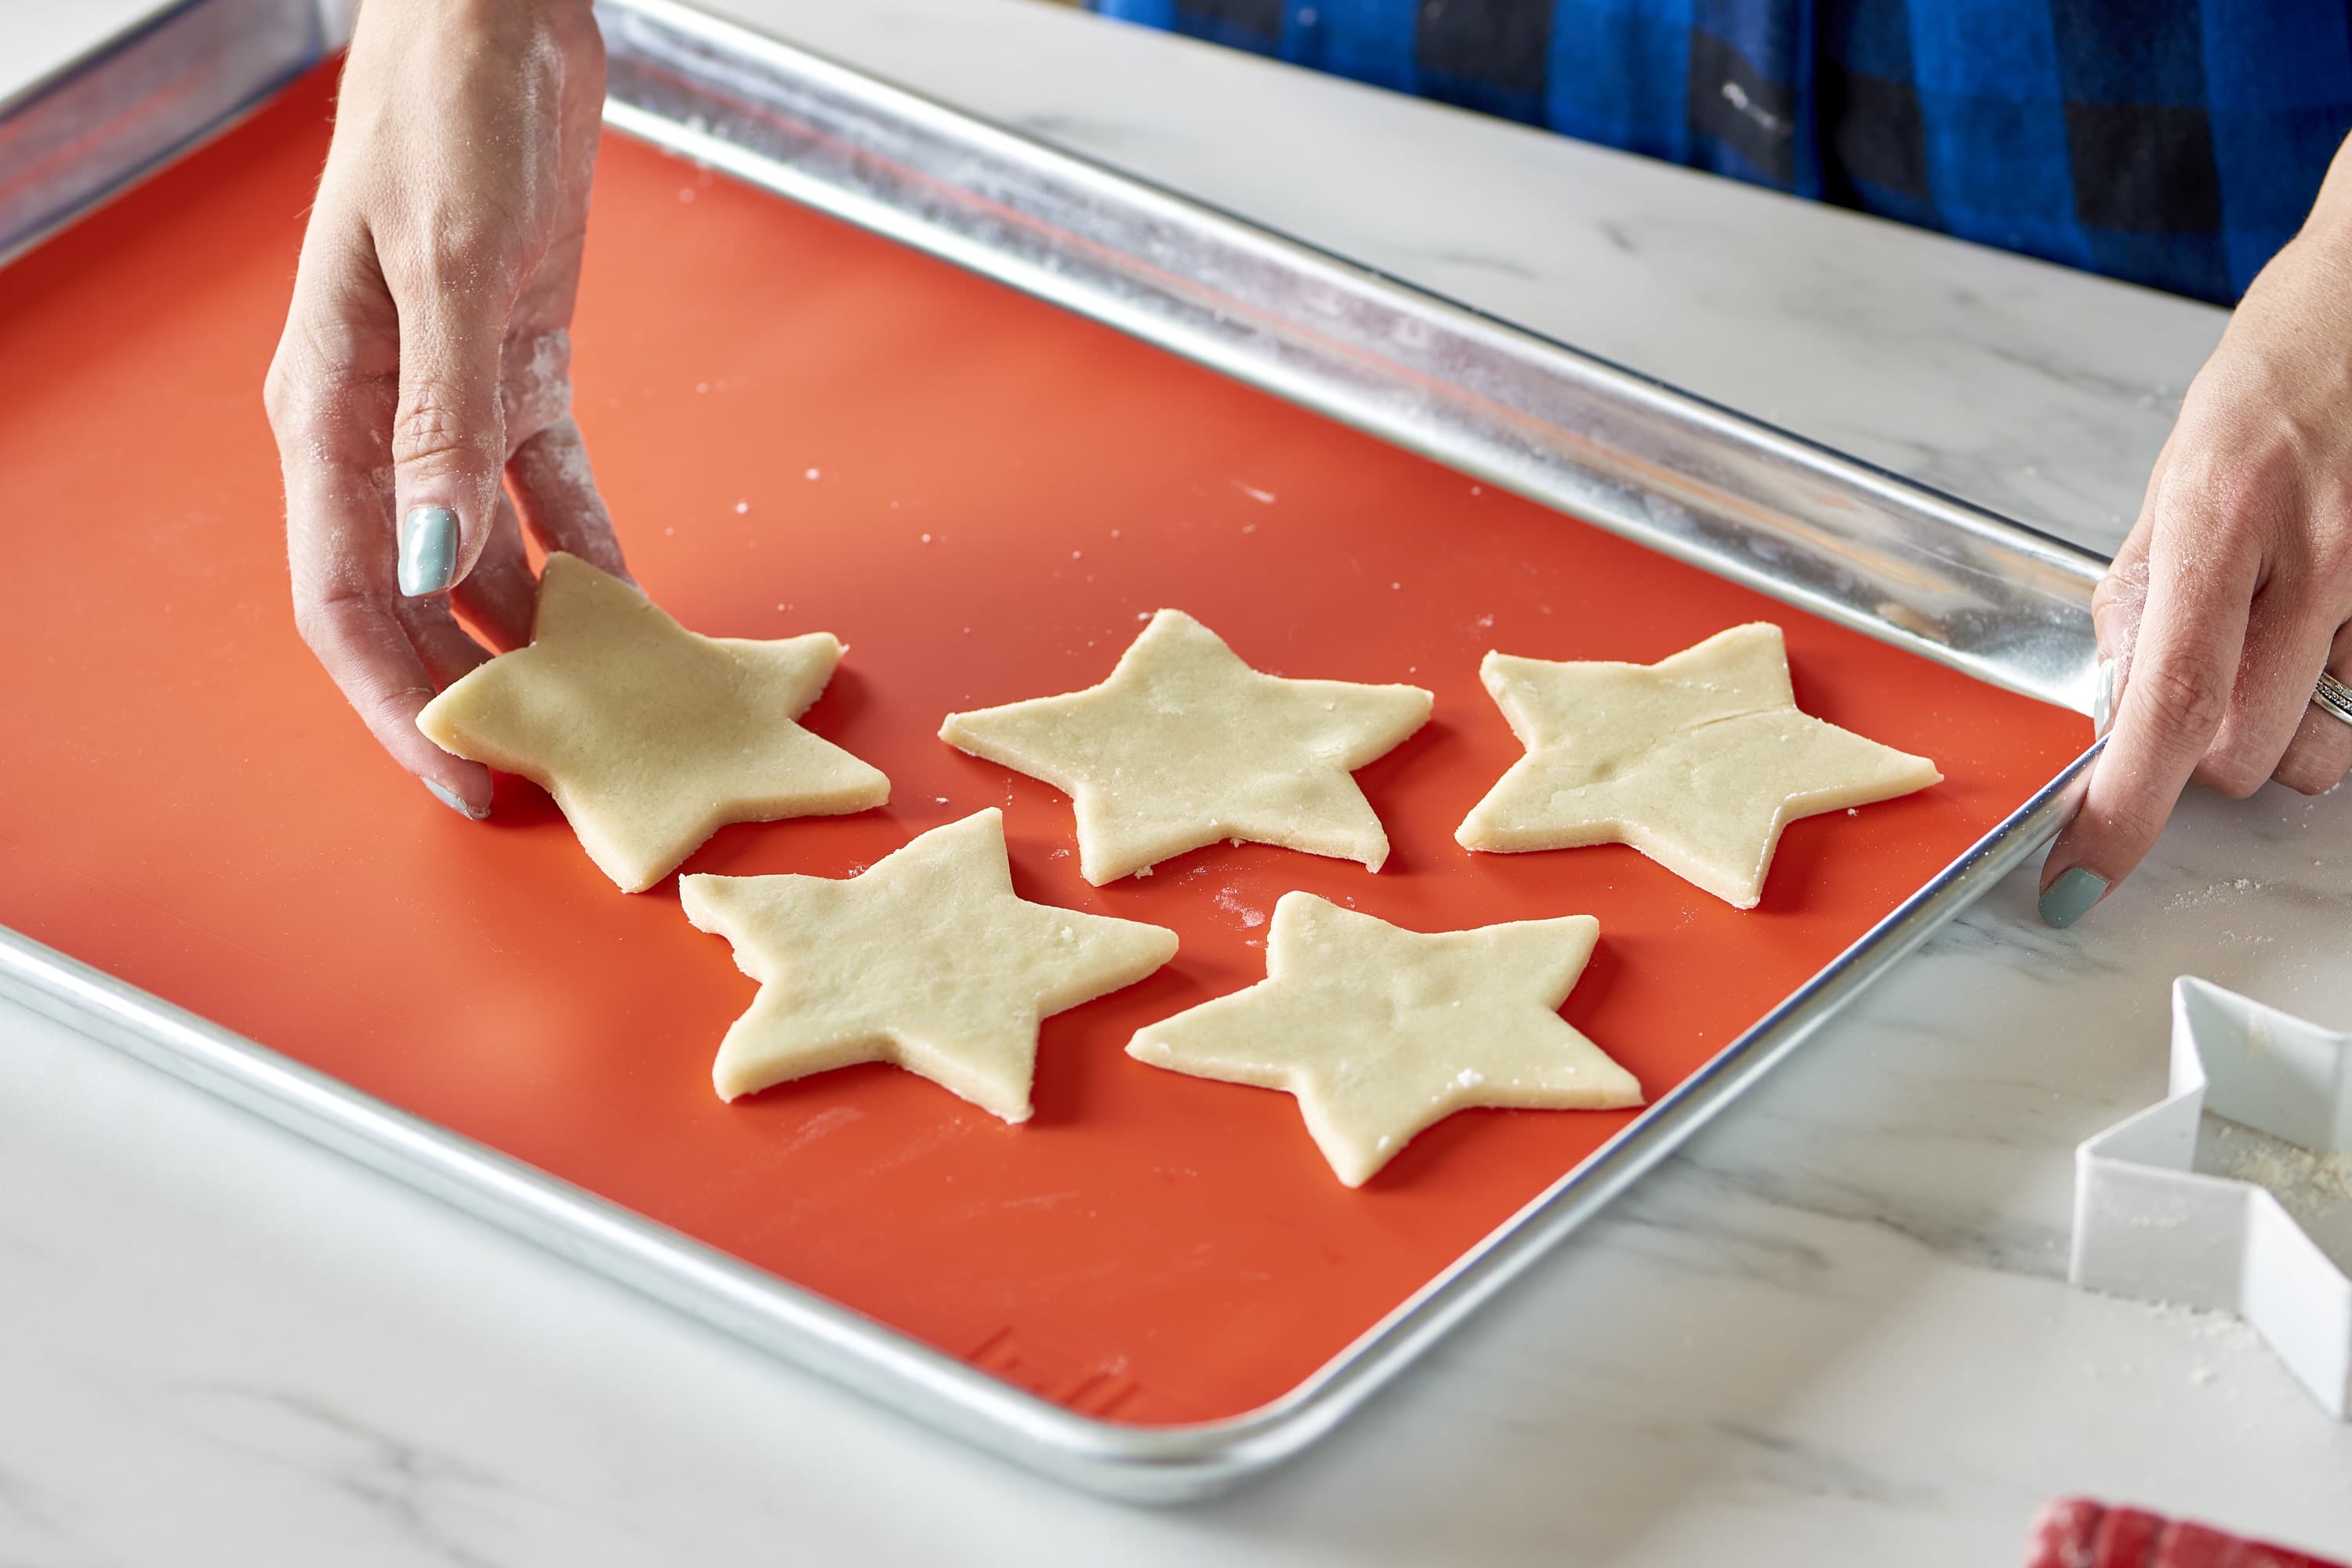 The 9 Best Silicone Baking Mats of 2024